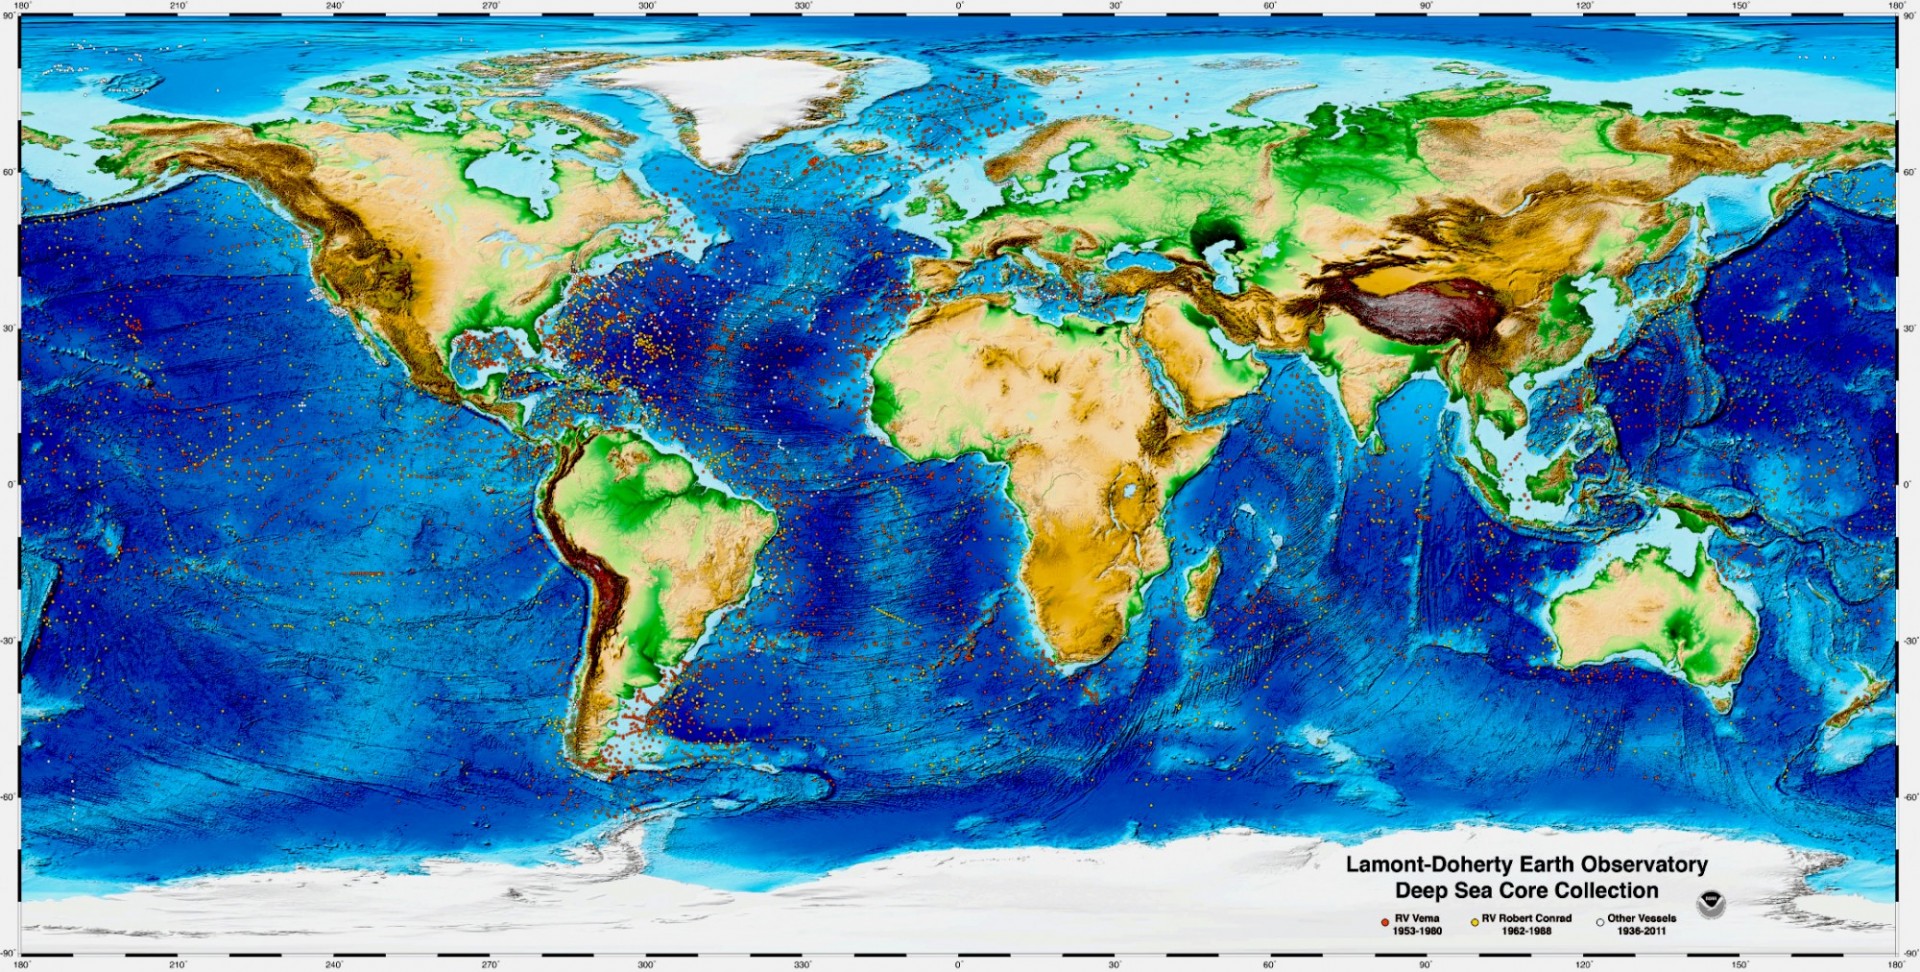 Map of the Lamont-Doherty Earth Observatory Deep Sea Core Collection